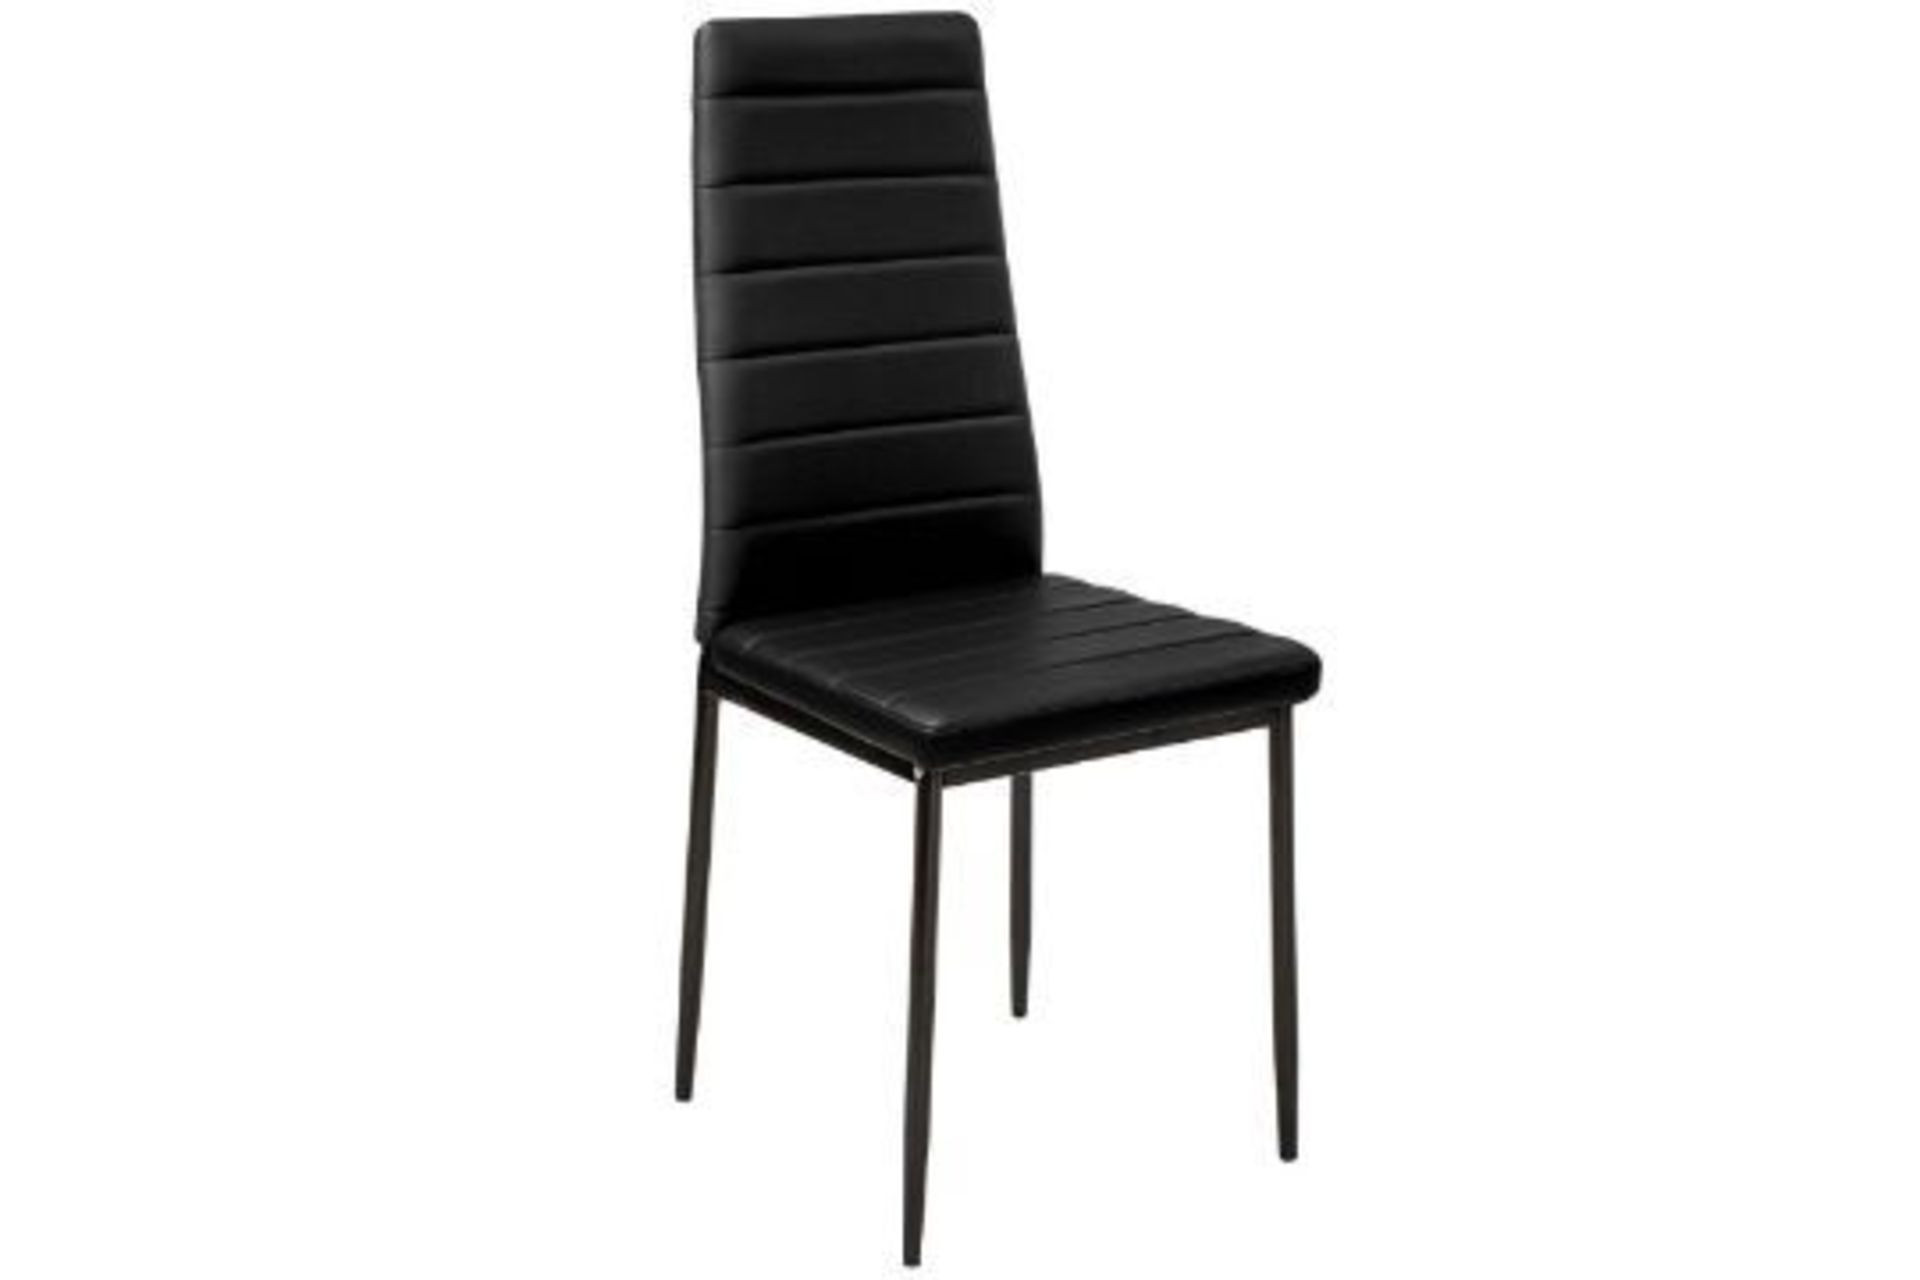 4 X NEW BOXED Modern Synthetic Leather Dining Chairs In Black. RRP £99.99 each, giving this lot a - Image 2 of 6